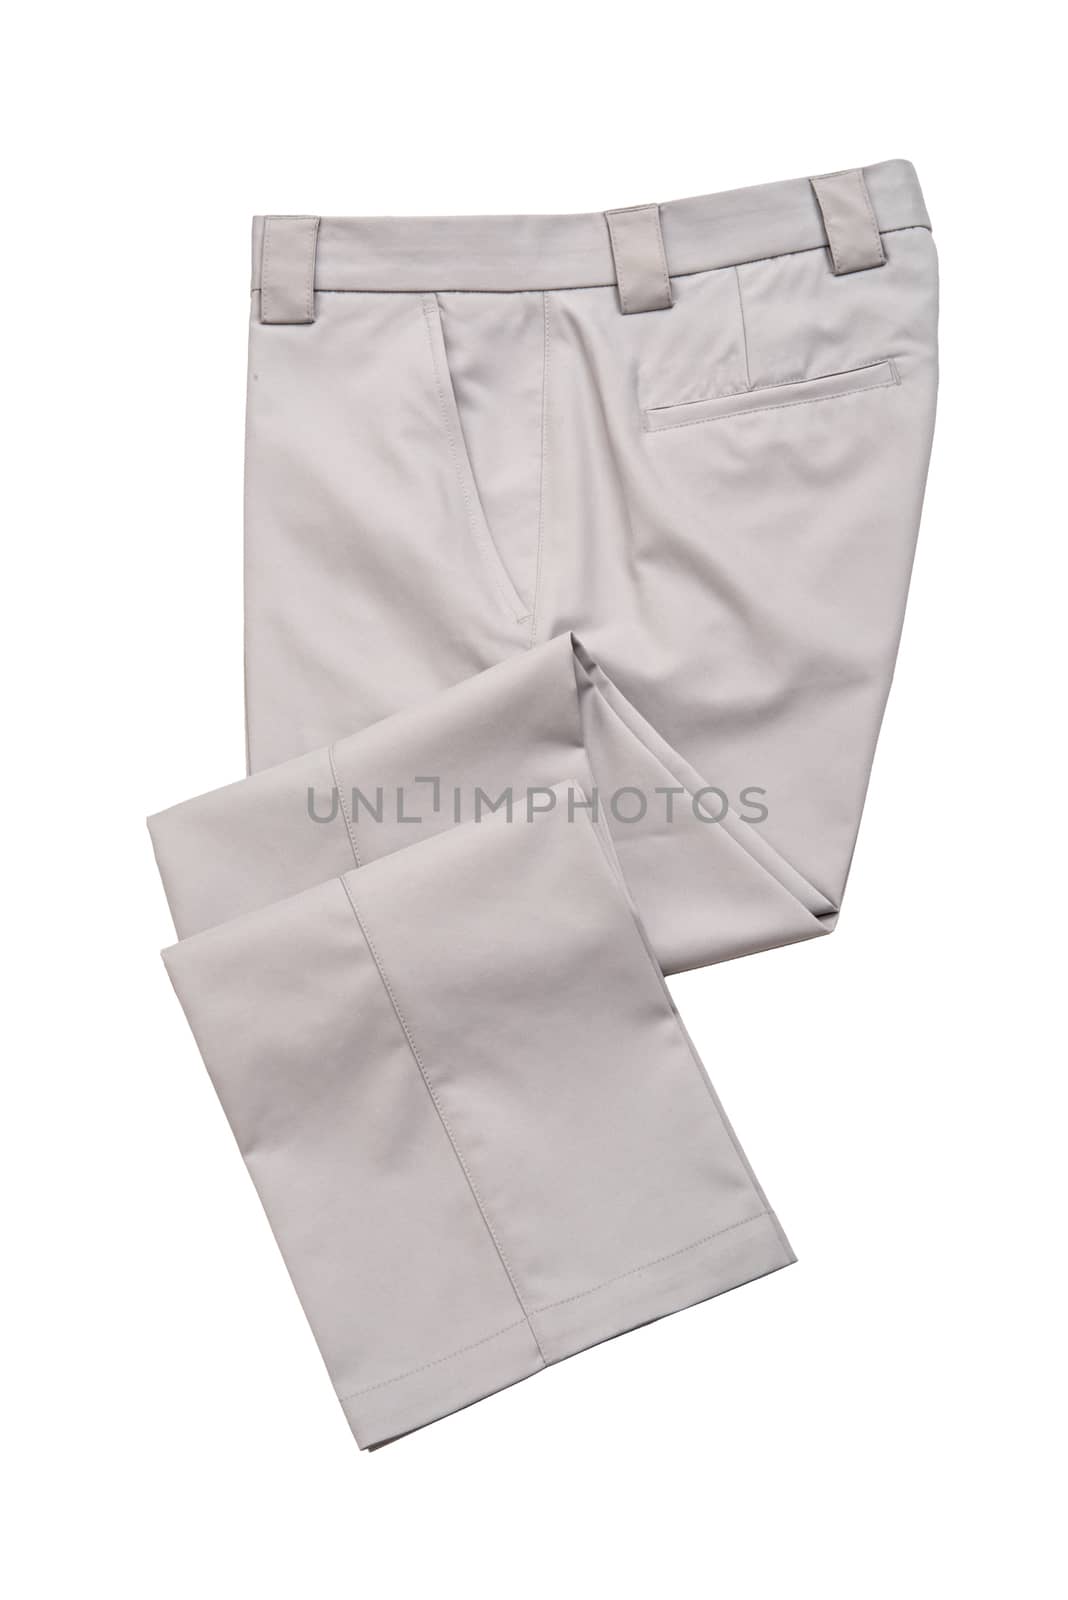 Pants Trousers for Man Gray Color on White Background